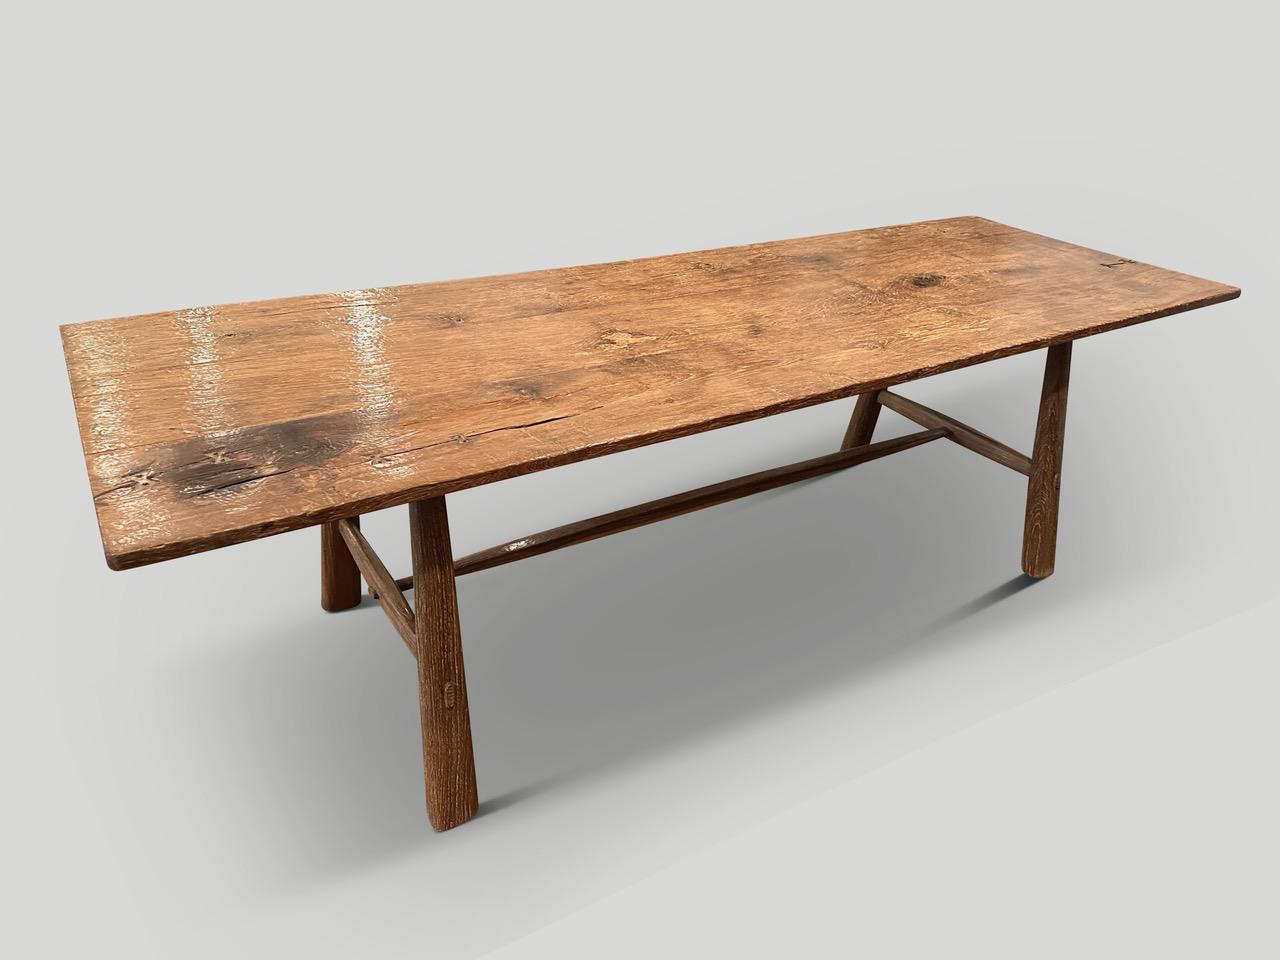 Andrianna Shamaris Midcentury Couture Teak Wood Dining Table In Excellent Condition For Sale In New York, NY